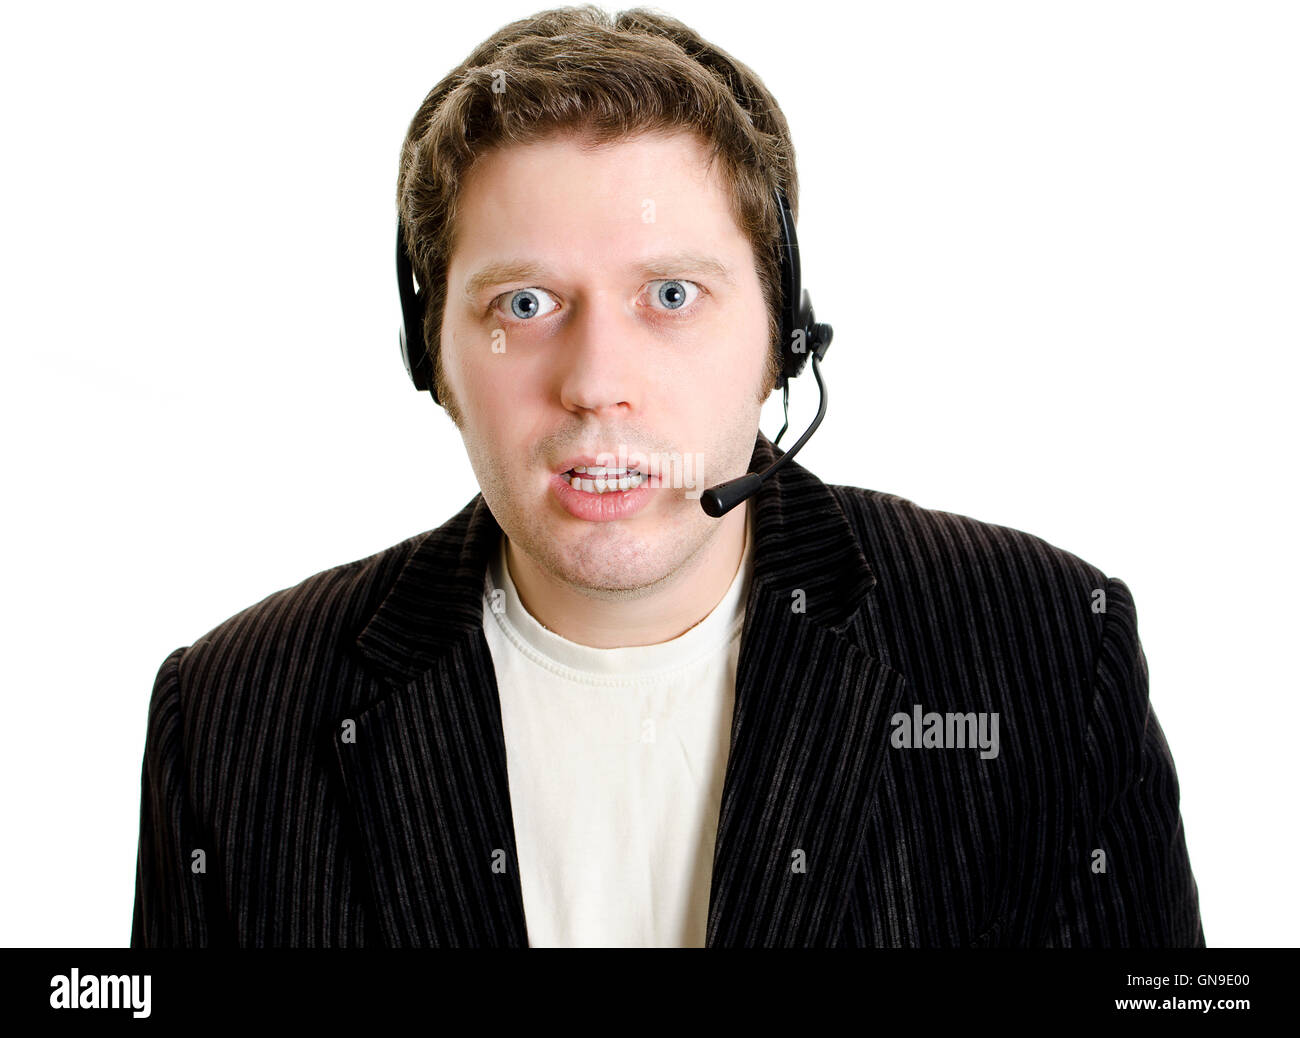 Sports commentator or Customer support with headphones in shock. Isolated on white. Stock Photo